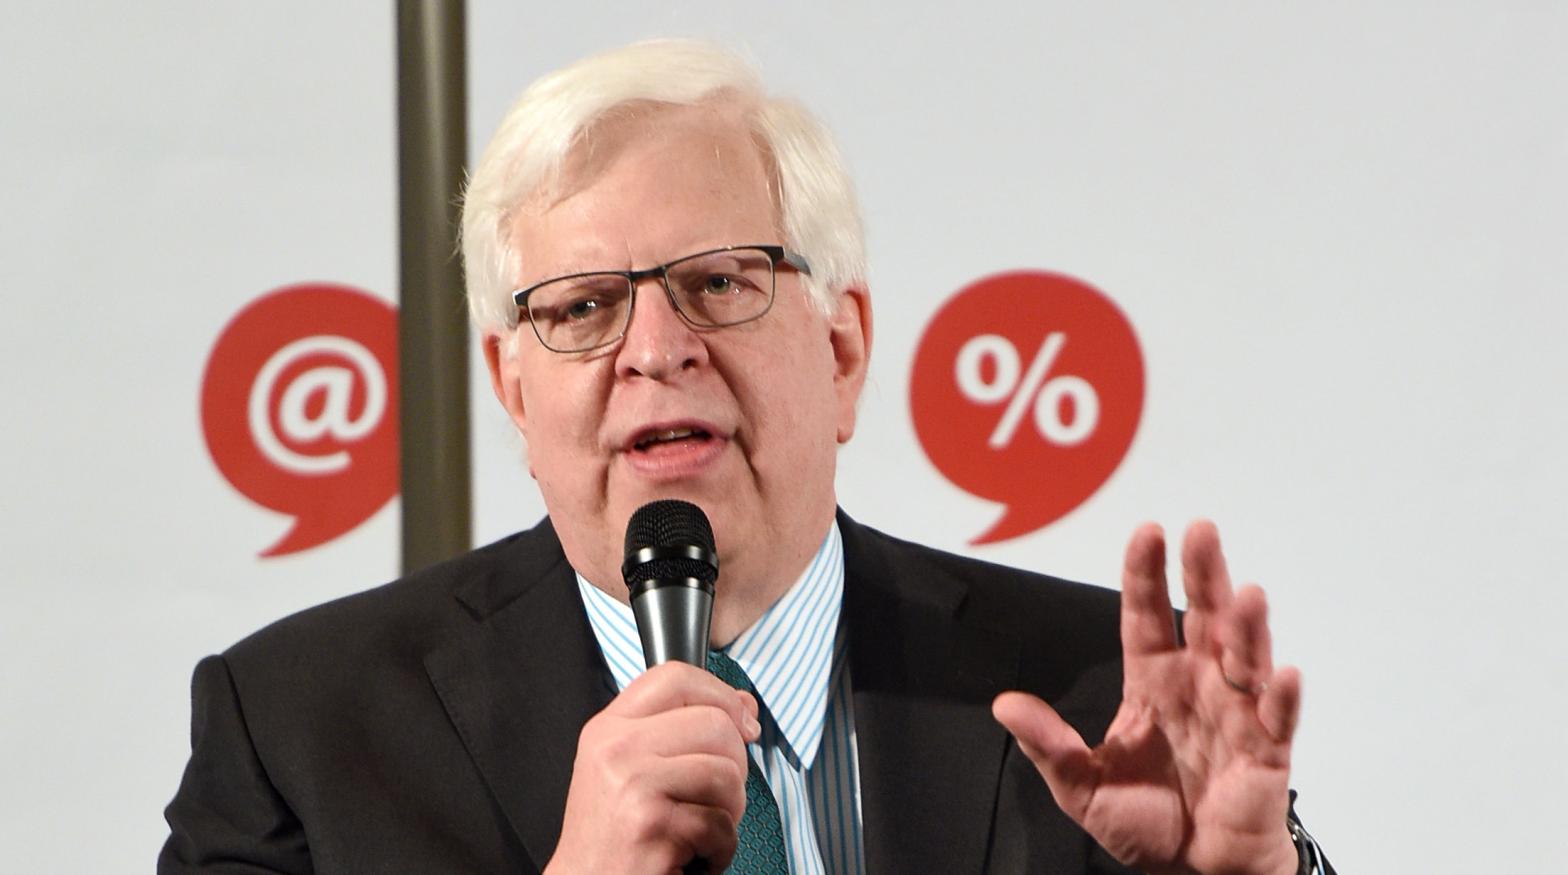 Dennis Prager. (Photo: Joshua Blanchard/Getty Images for Politicon, Getty Images)